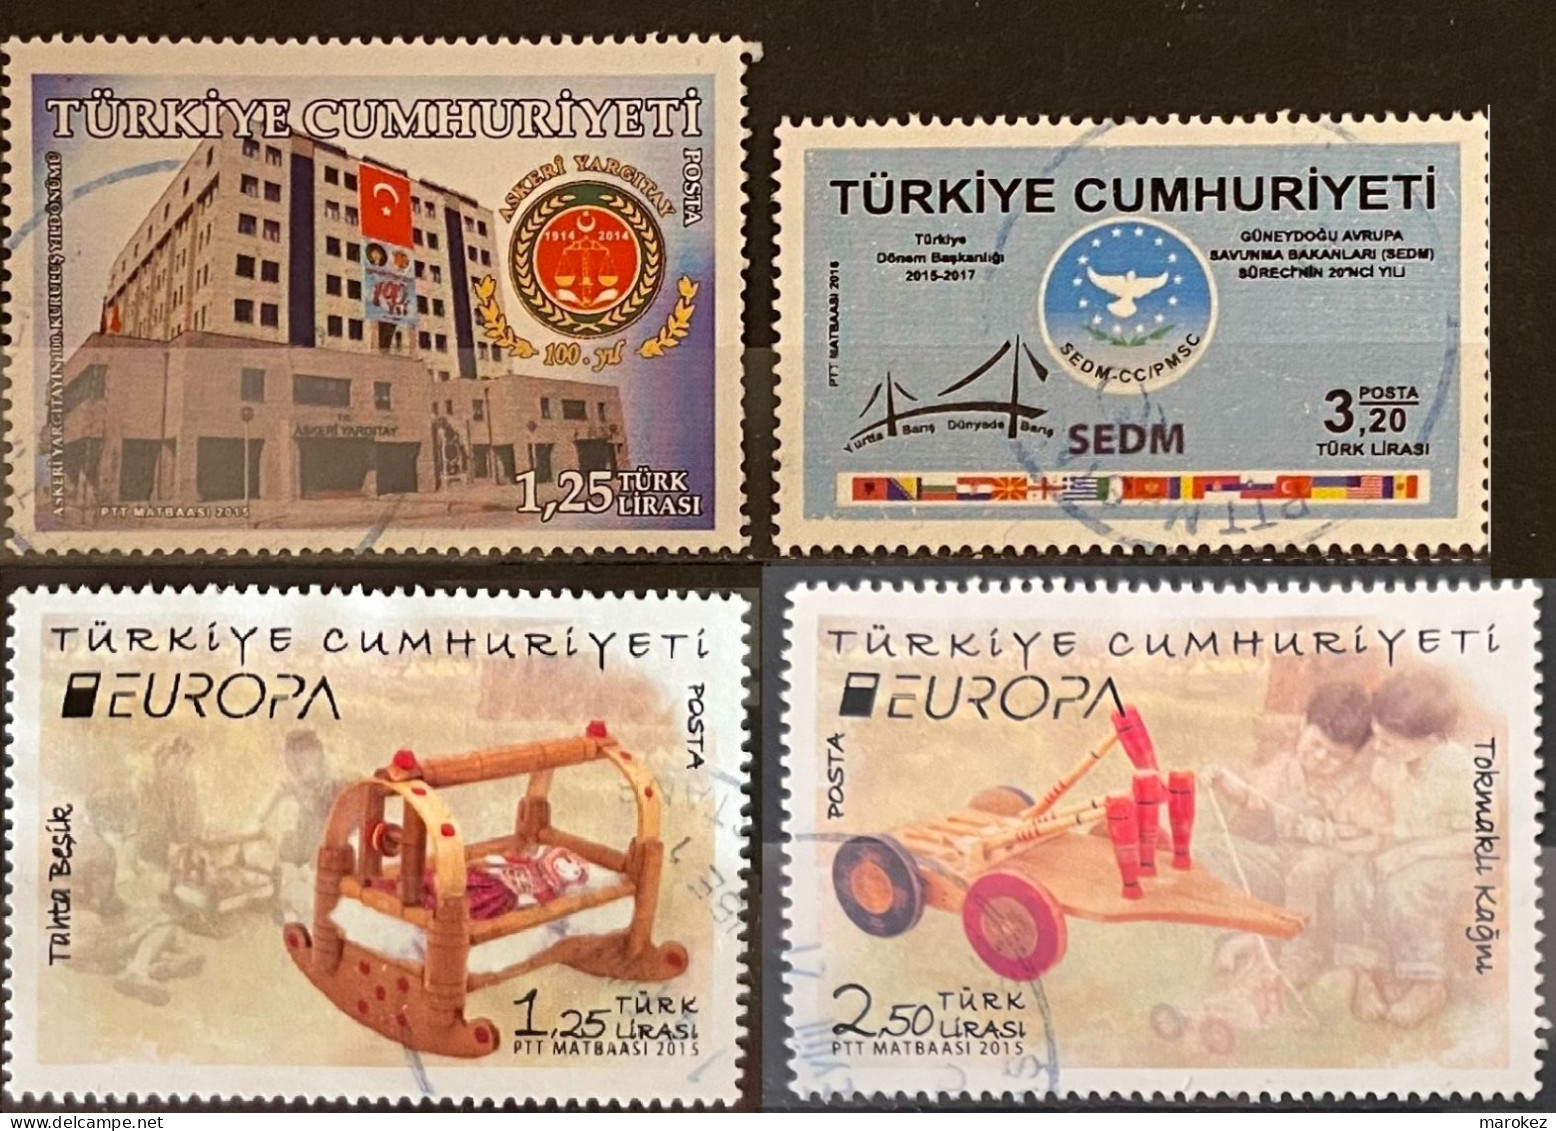 TURKEY 2015-2016 Institutions, Europa & Associations 4 Postally Used Stamps MICHEL # 4166,4176,4177,4307 - Gebraucht